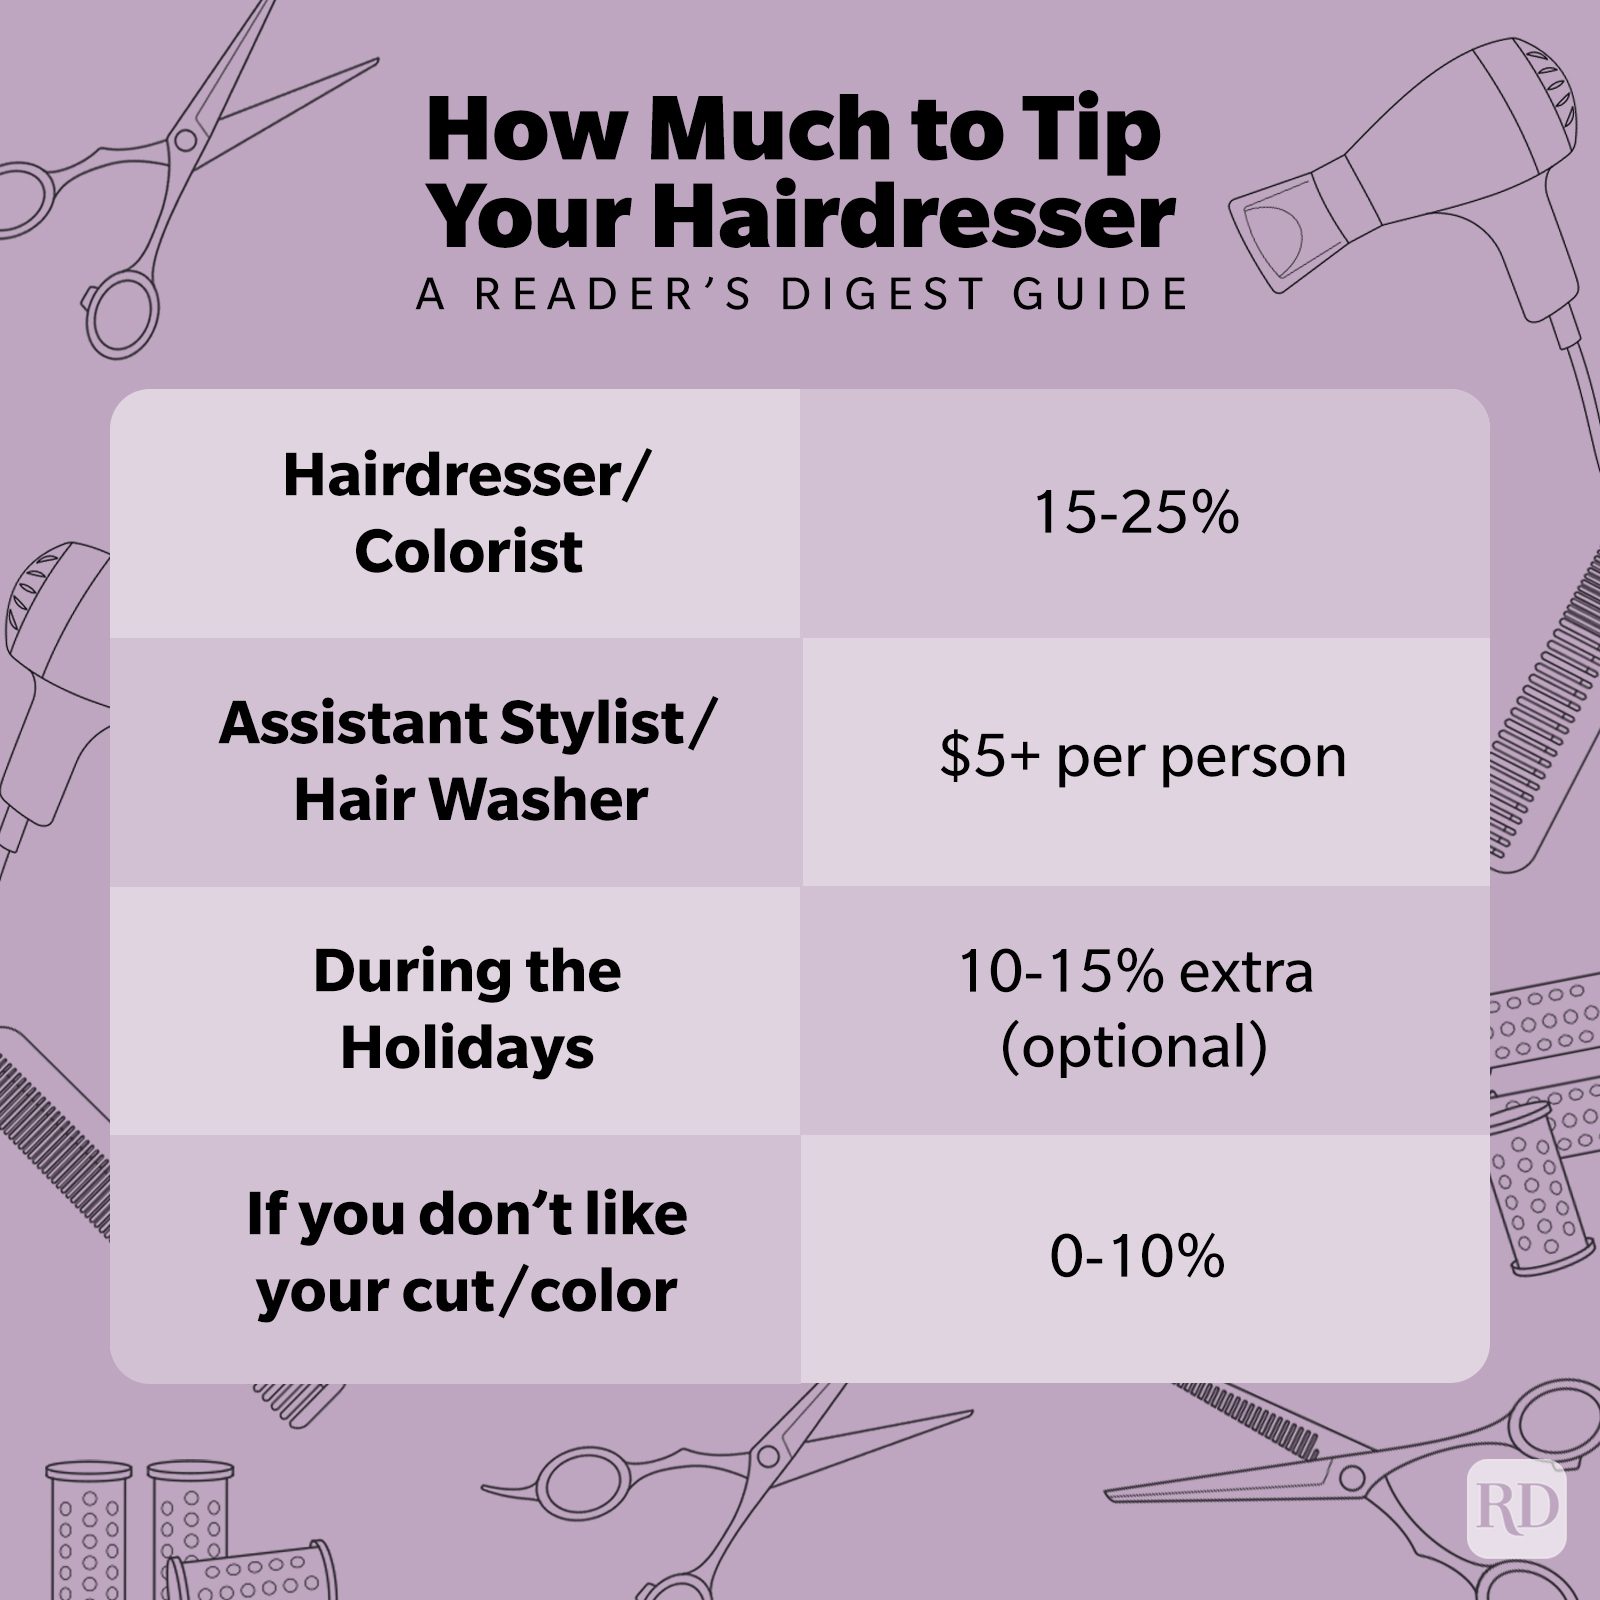 How Much To Tip Your Hairdresser Infographic